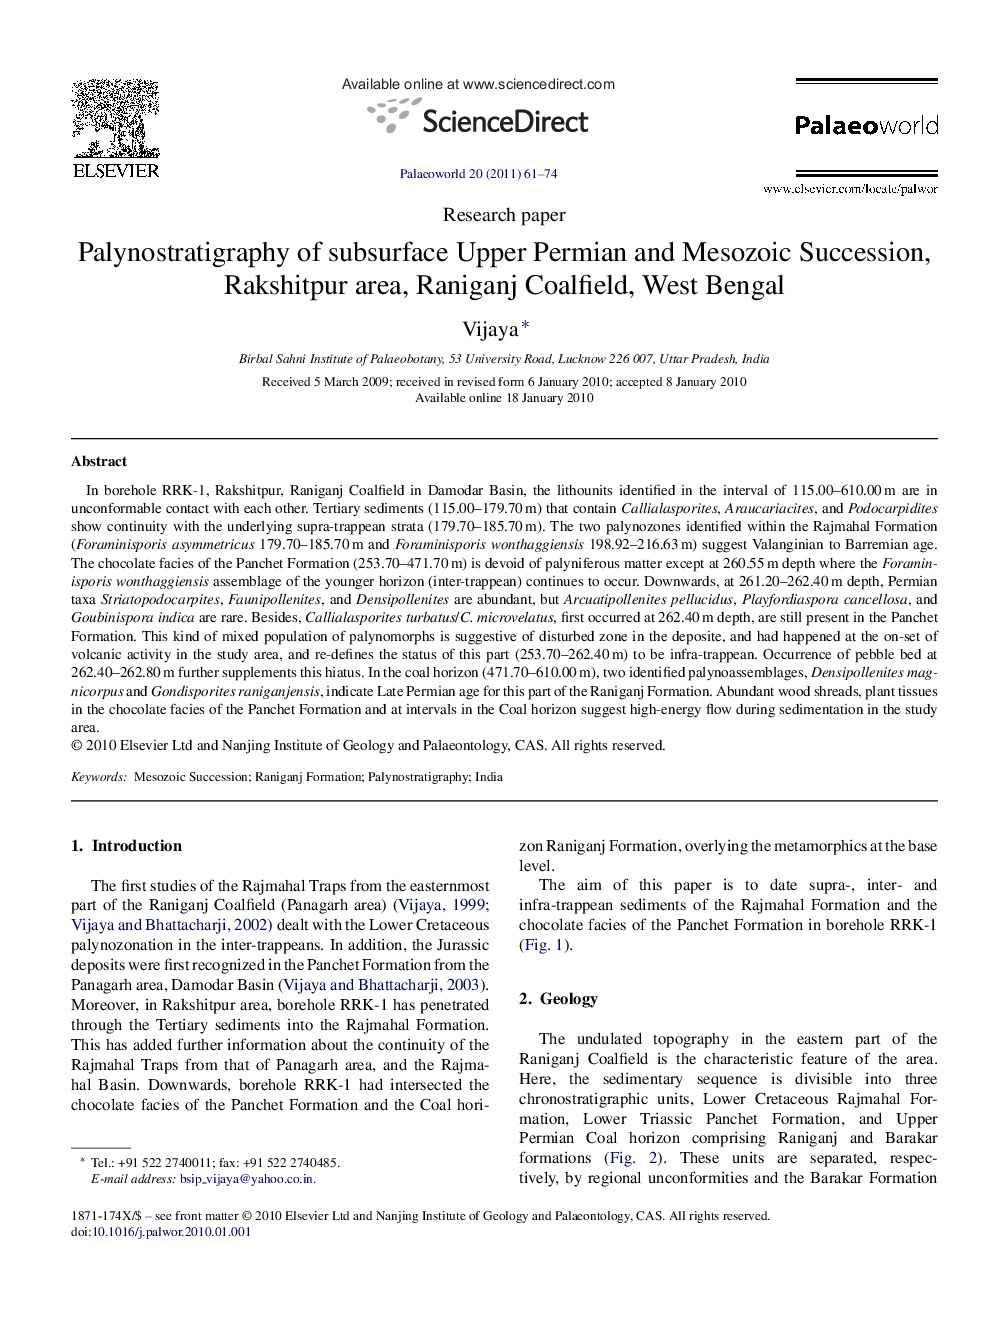 Palynostratigraphy of subsurface Upper Permian and Mesozoic Succession, Rakshitpur area, Raniganj Coalfield, West Bengal